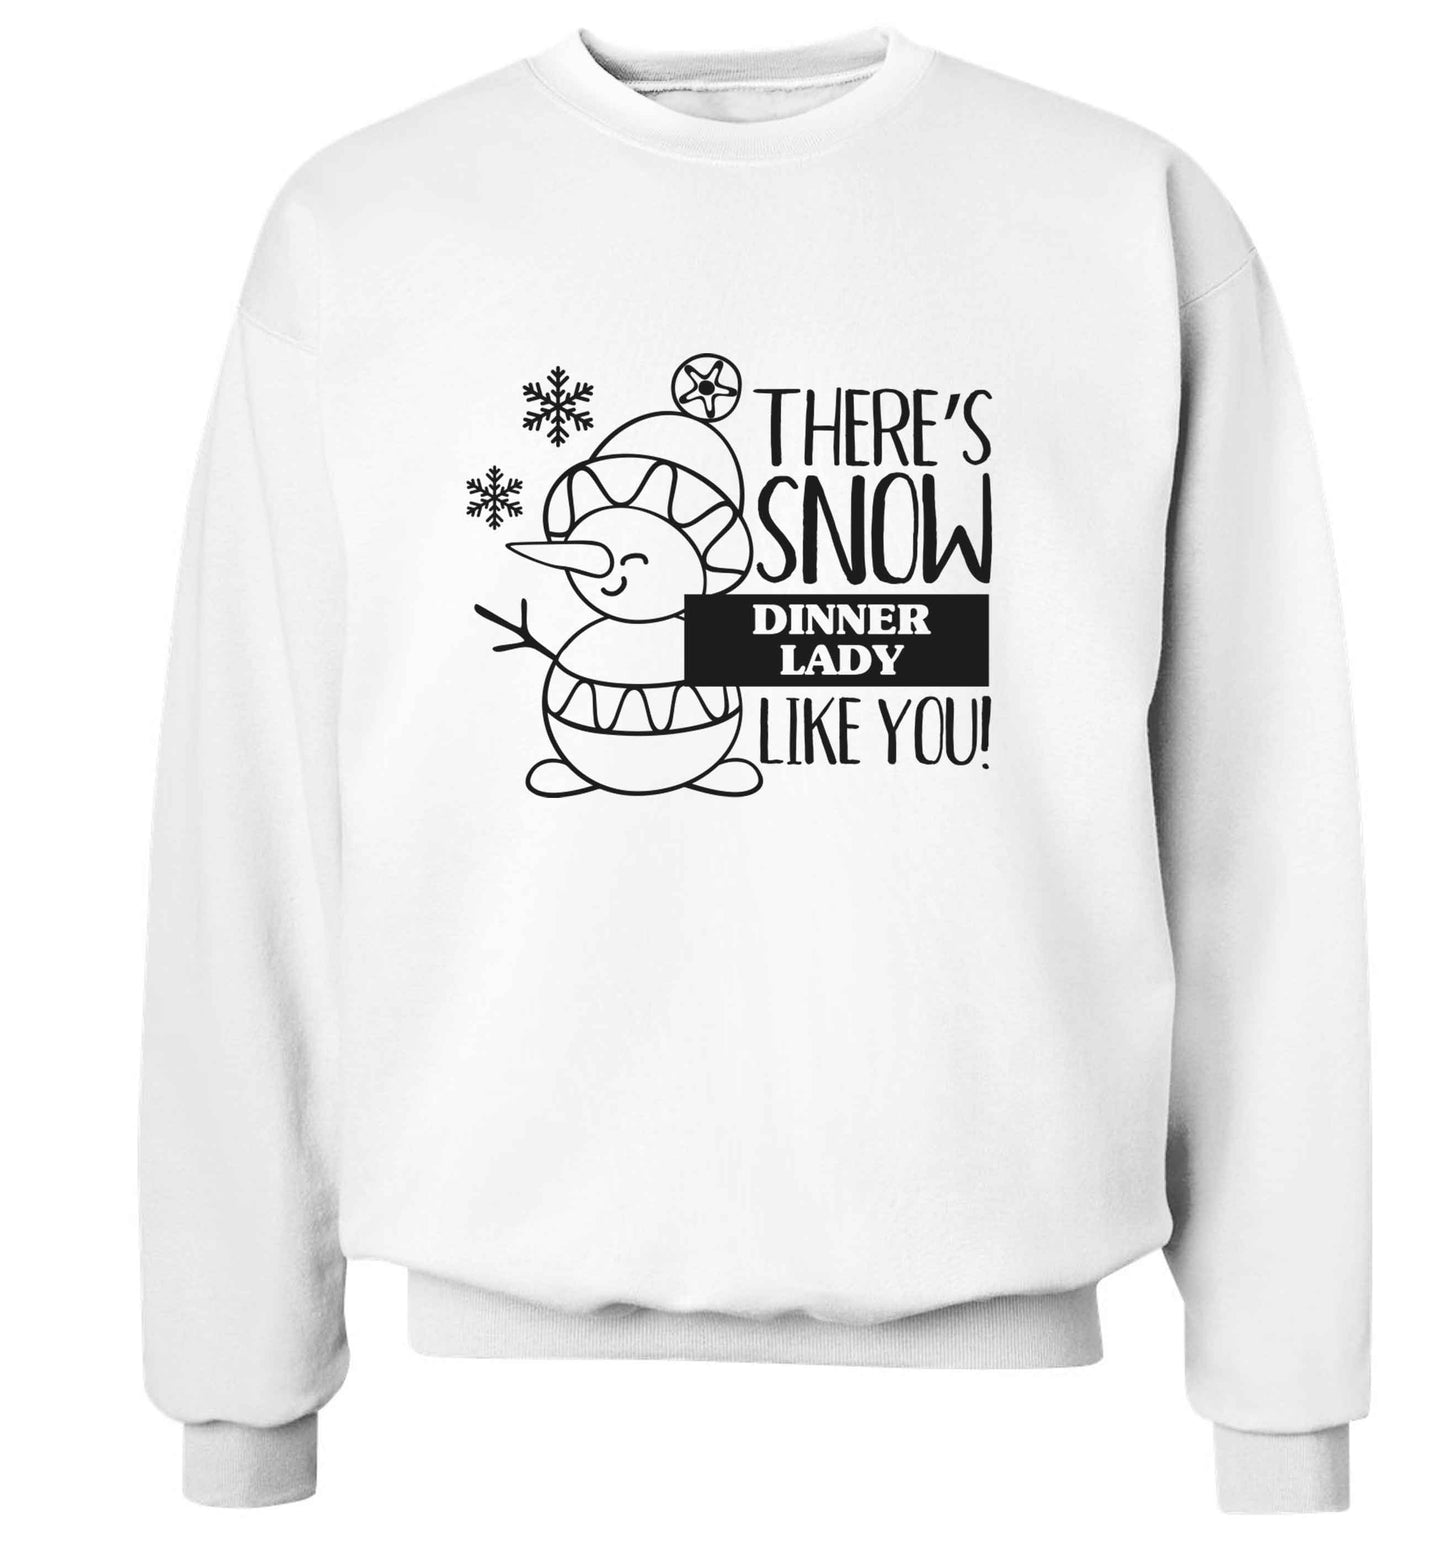 There's snow dinner lady like you adult's unisex white sweater 2XL